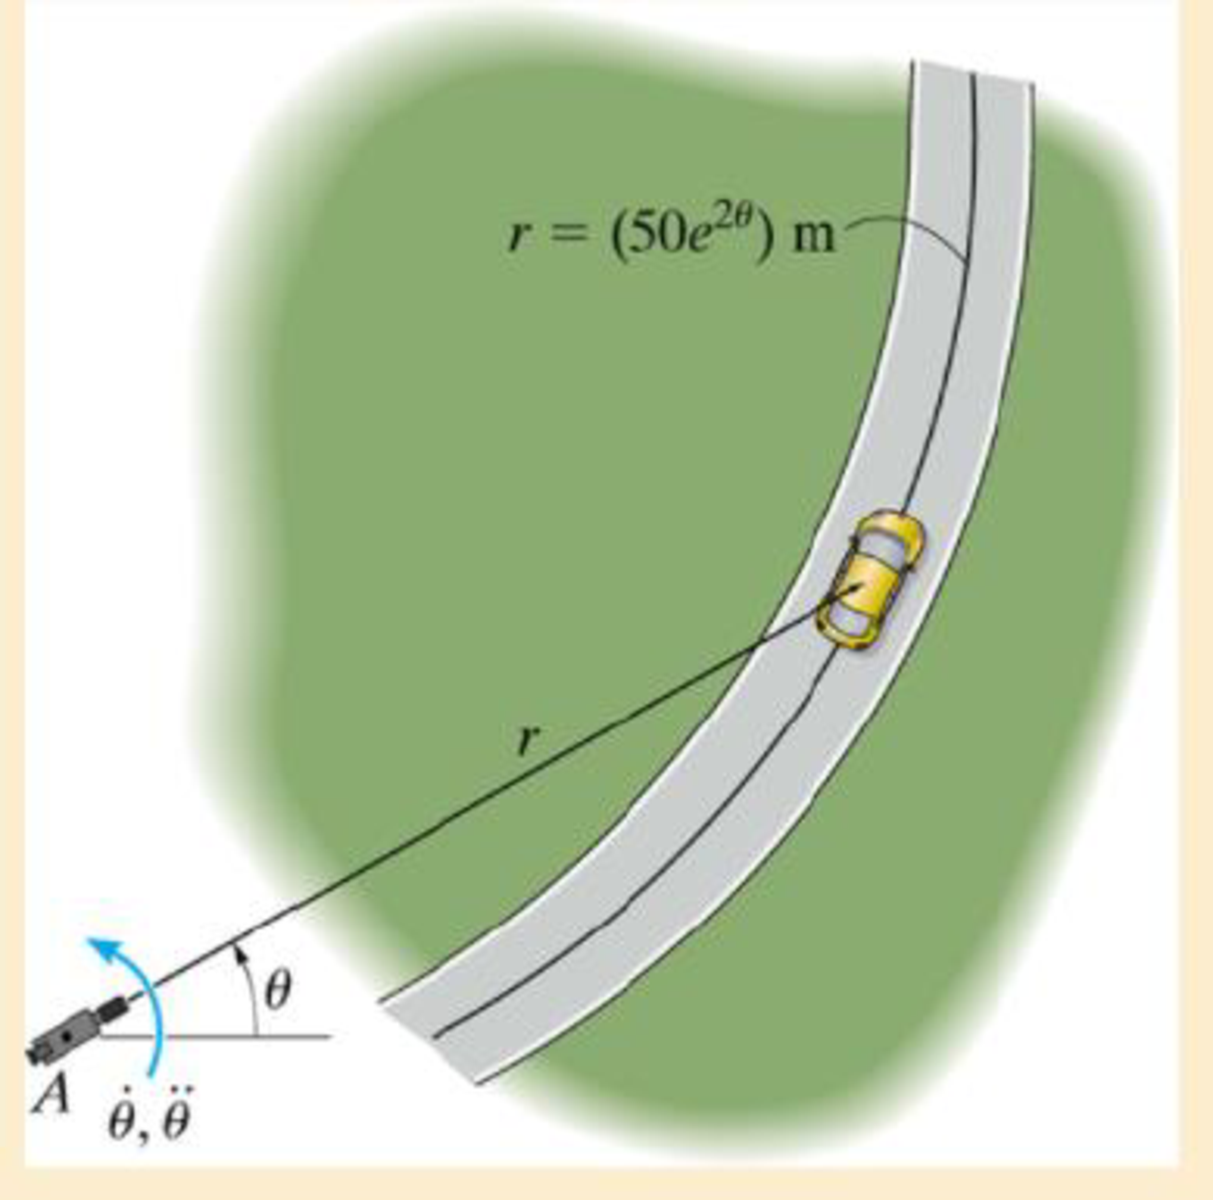 Chapter 13.6, Problem 15FP, The 2-Mg car is traveling along the curved road described by r = (50e2) m, where  is in radians. If 